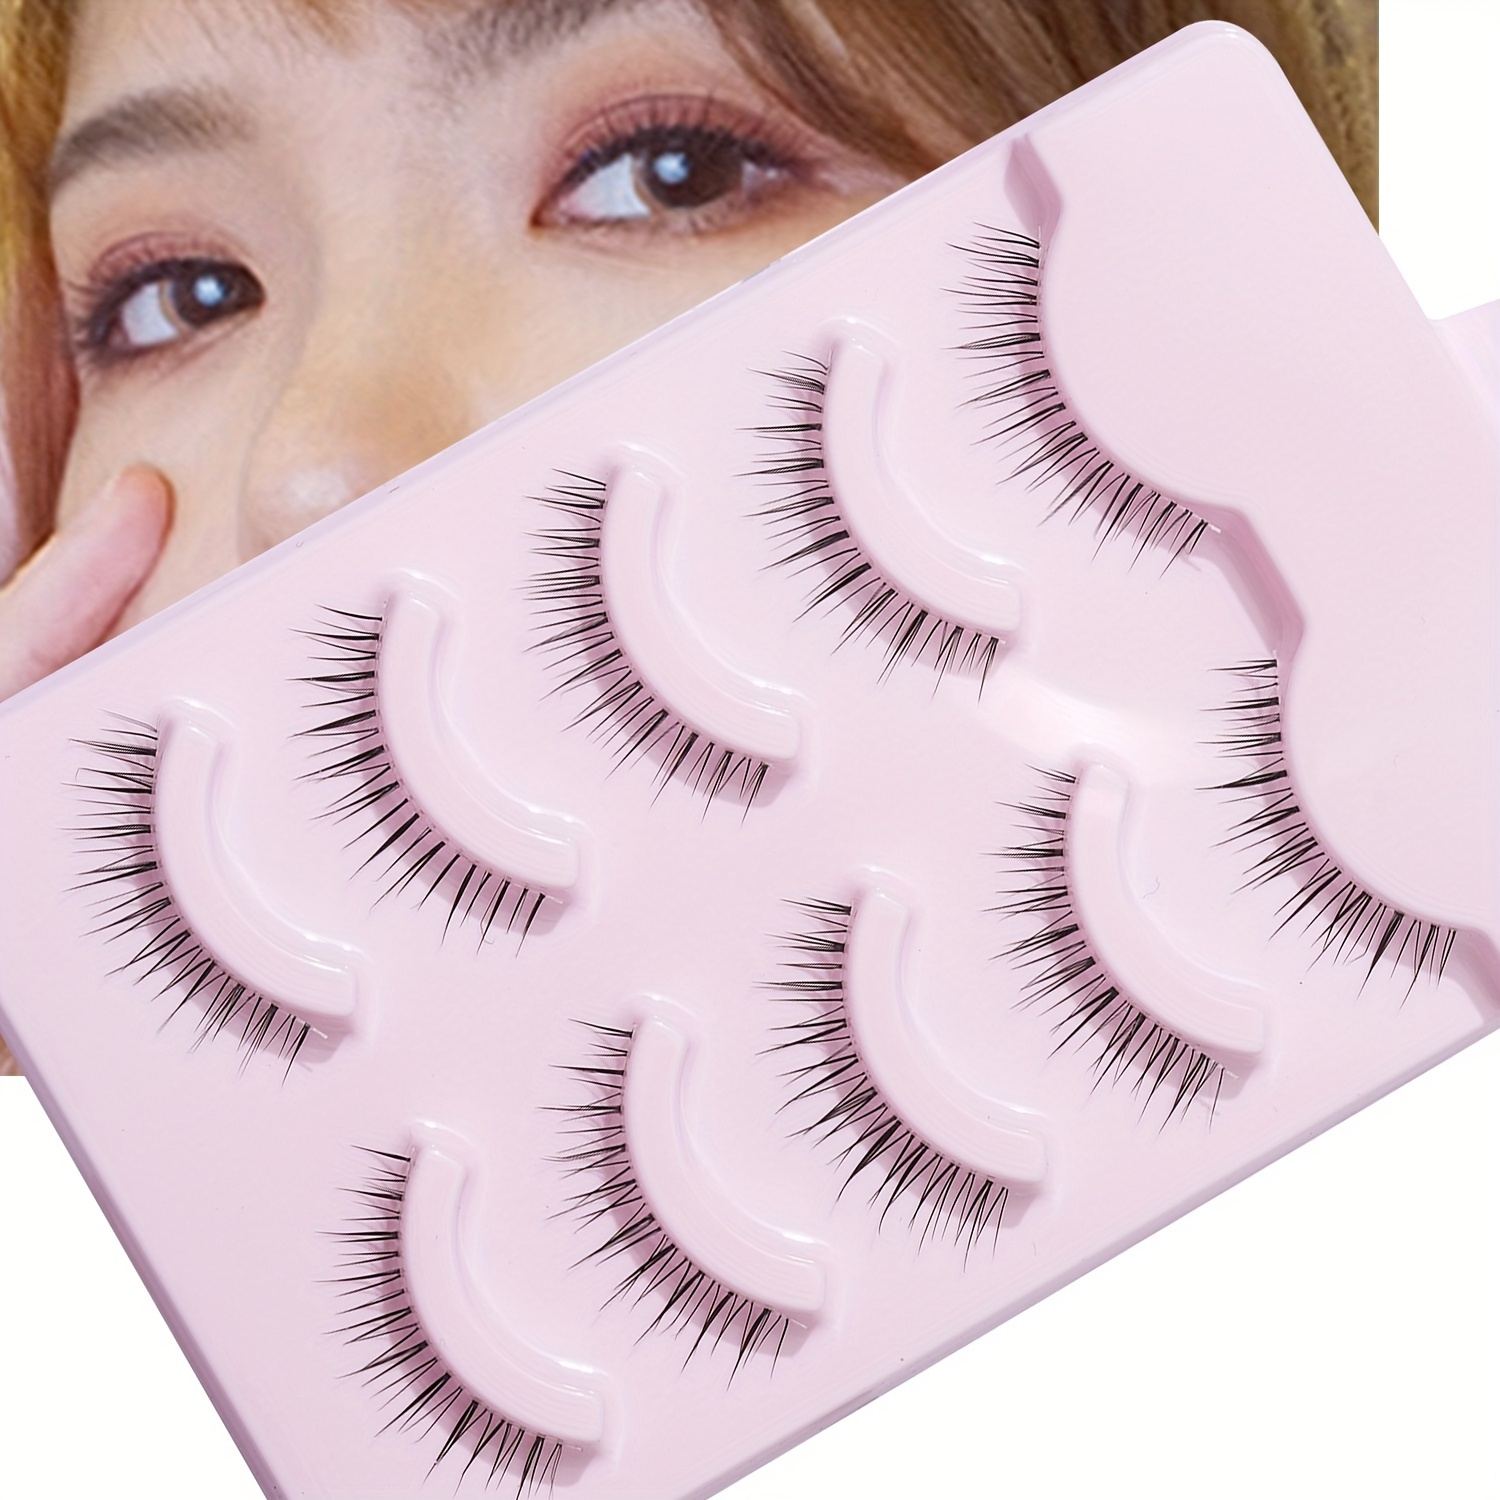 

5 Pairs/set Transparent Stem Upper & Lower Fairy Style False Eyelashes, 5-10mm Whole Strip False Eyelashes Natural Looking Long & Thinning, Suitable For Daily Wear And Work Commute